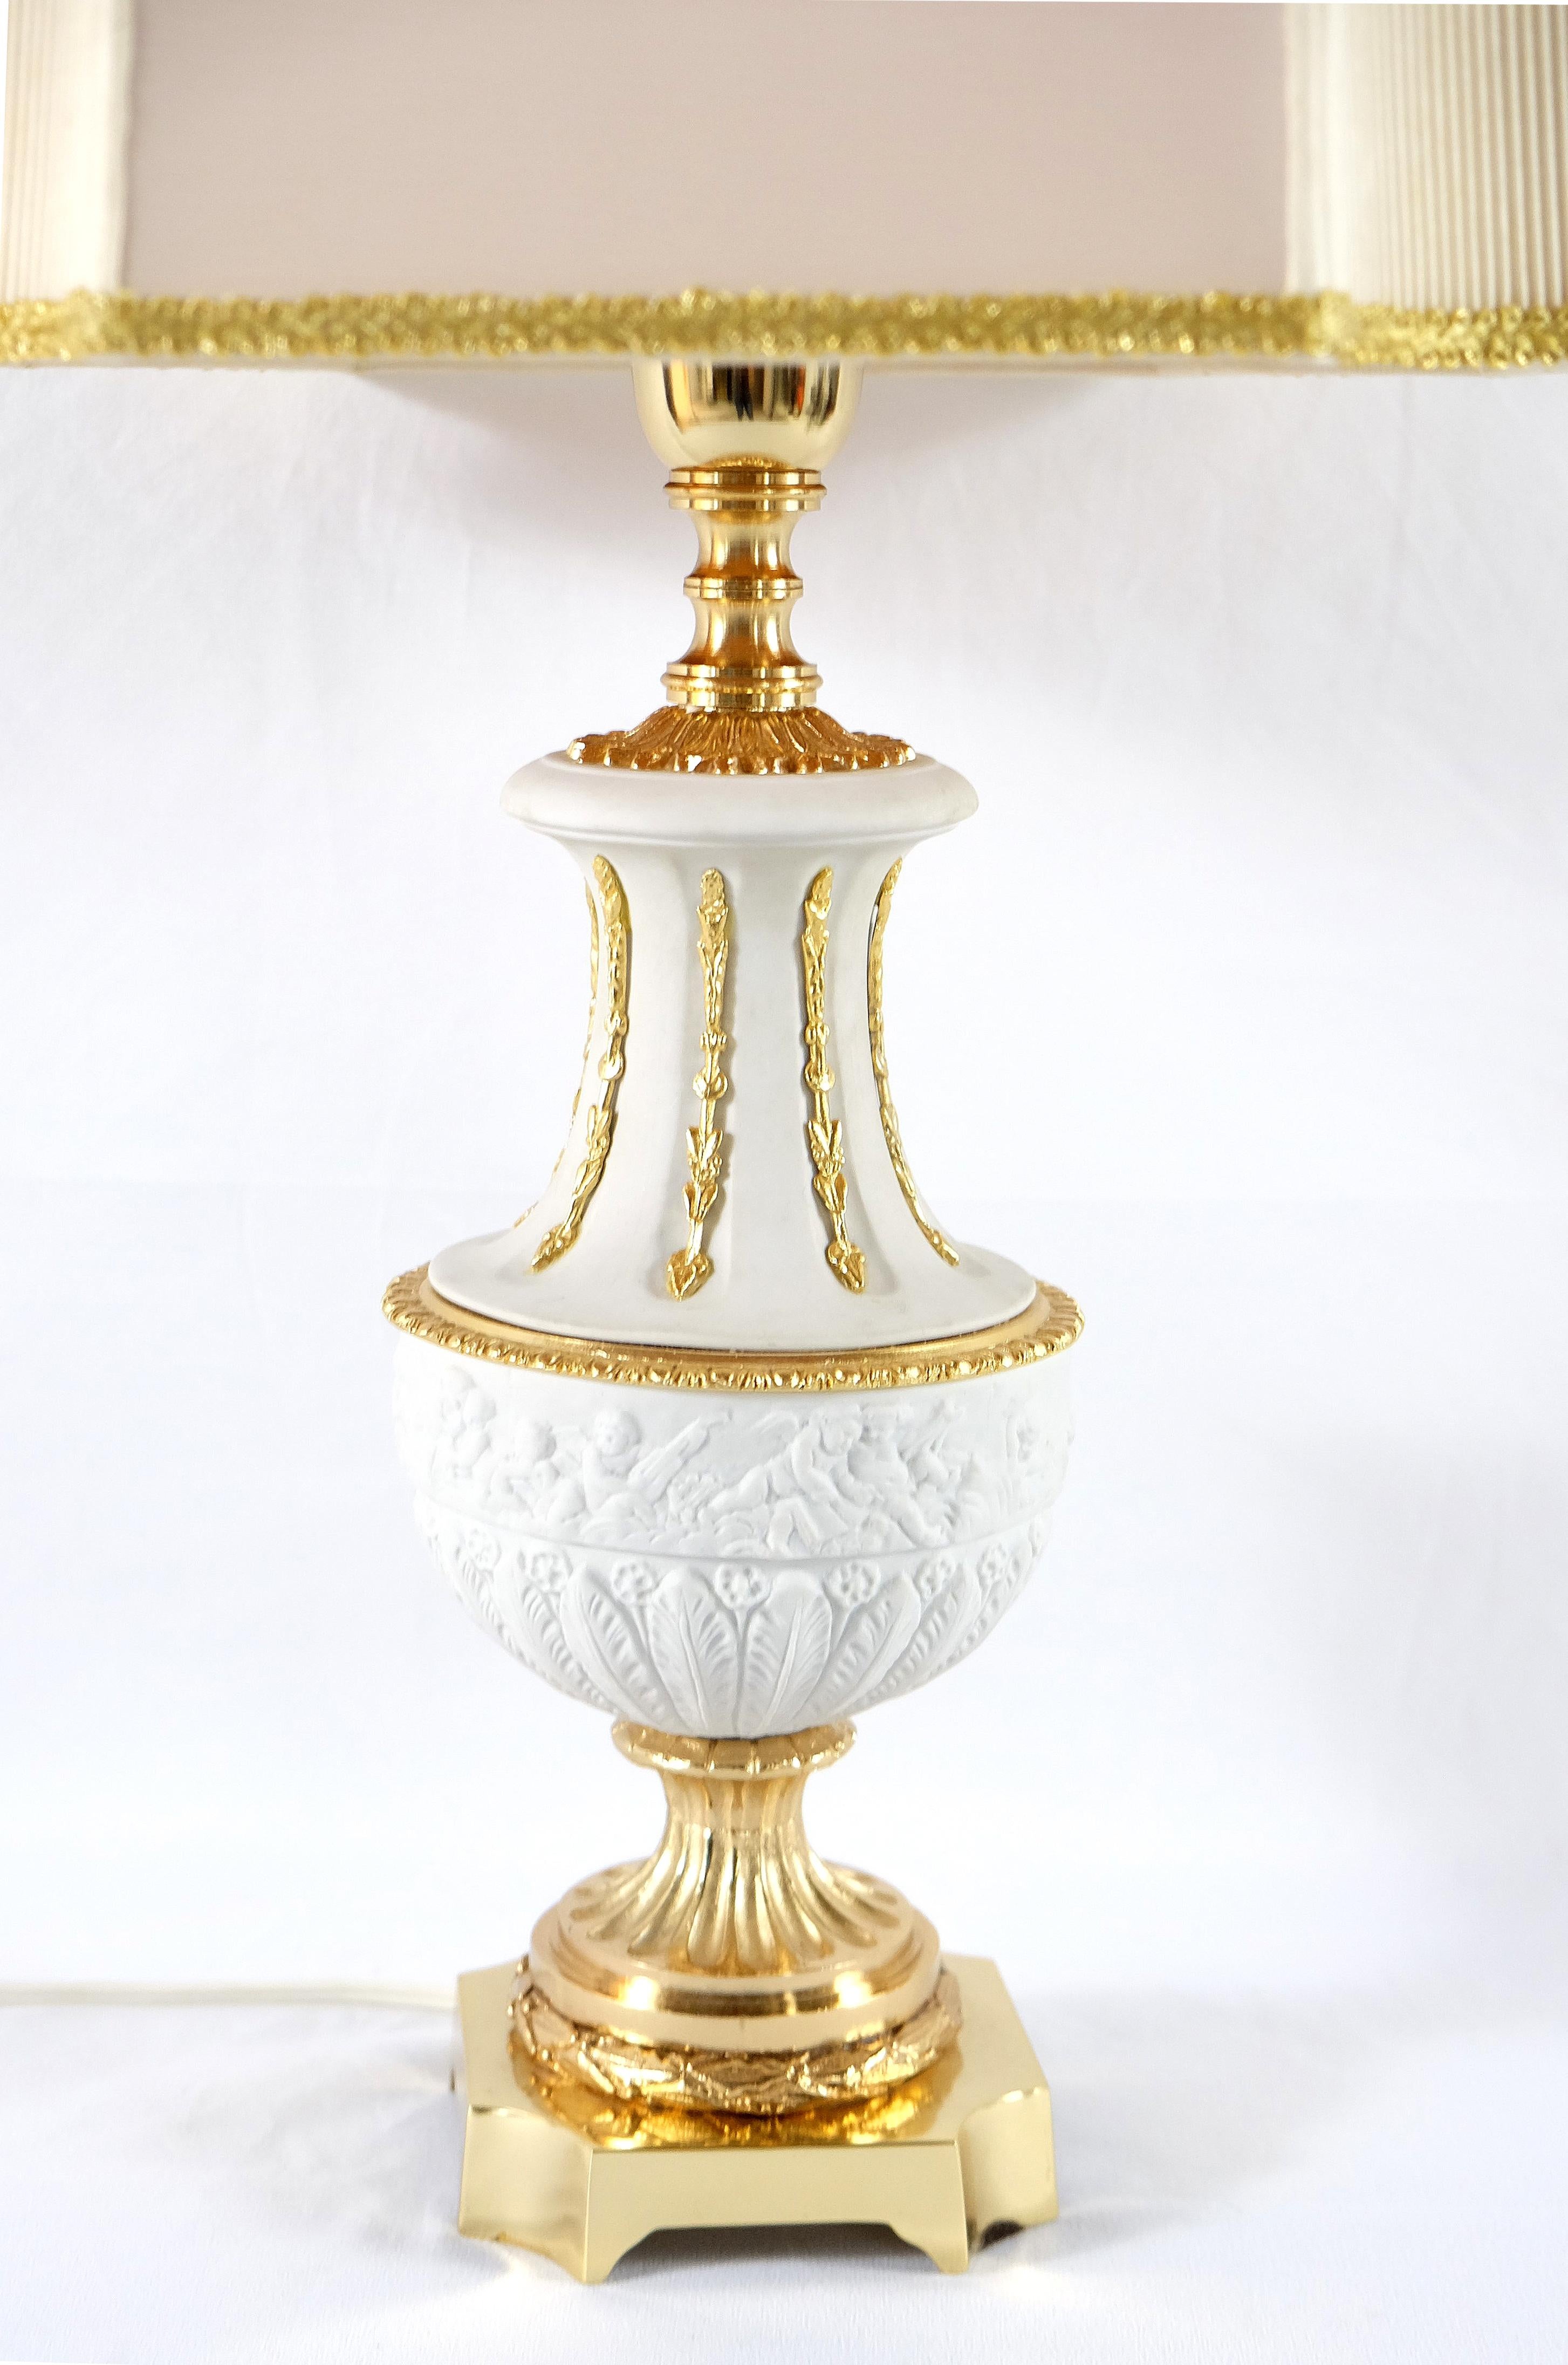 Mangani, Italy Classically Designed Porcelain Table Lamp In Excellent Condition For Sale In Miami, FL